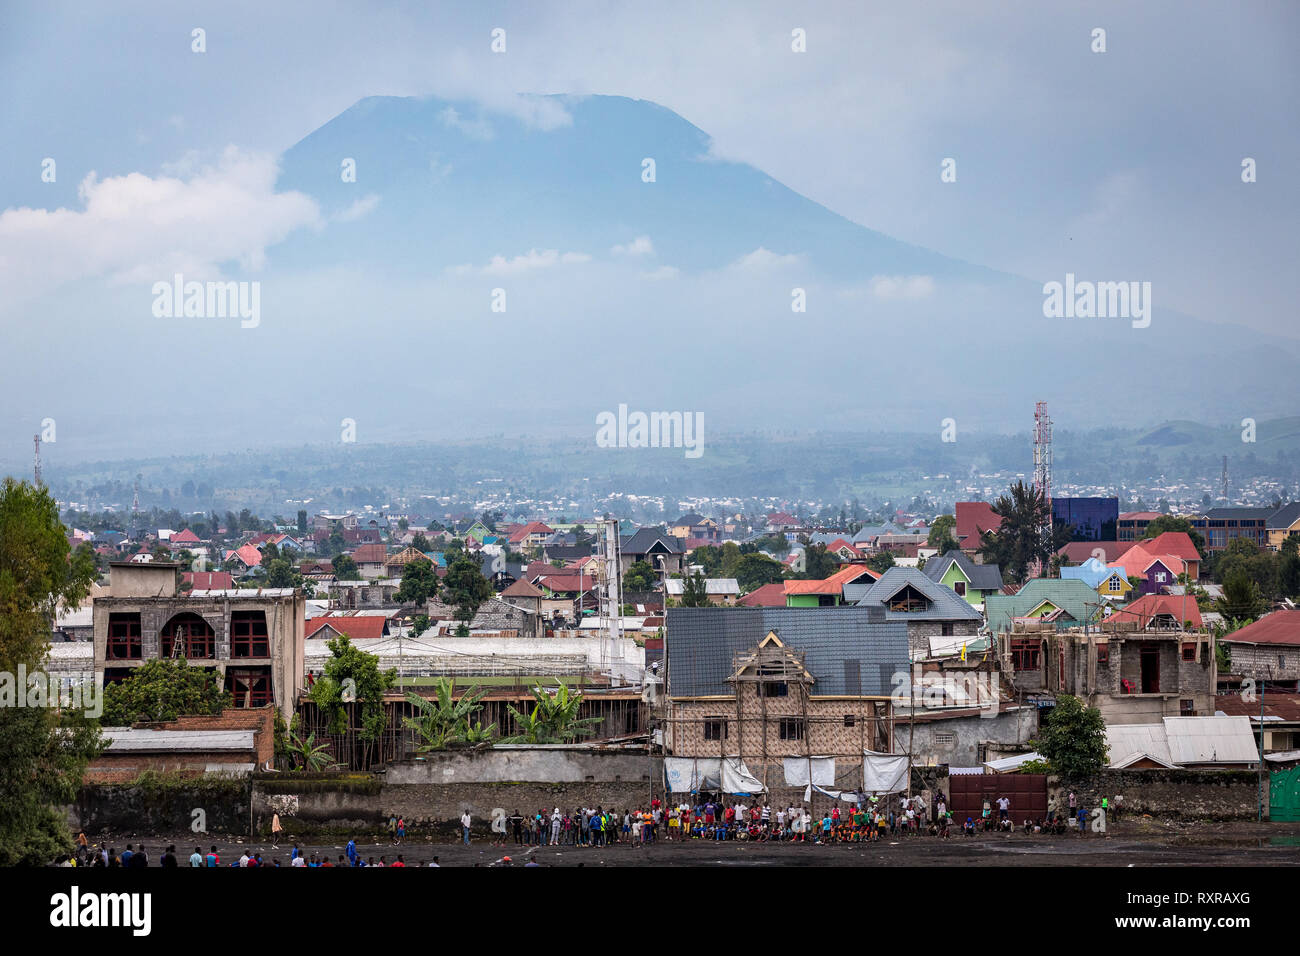 The city of Goma, Democratic Republic of Congo, with Nyiragongo volcano in the distance Stock Photo